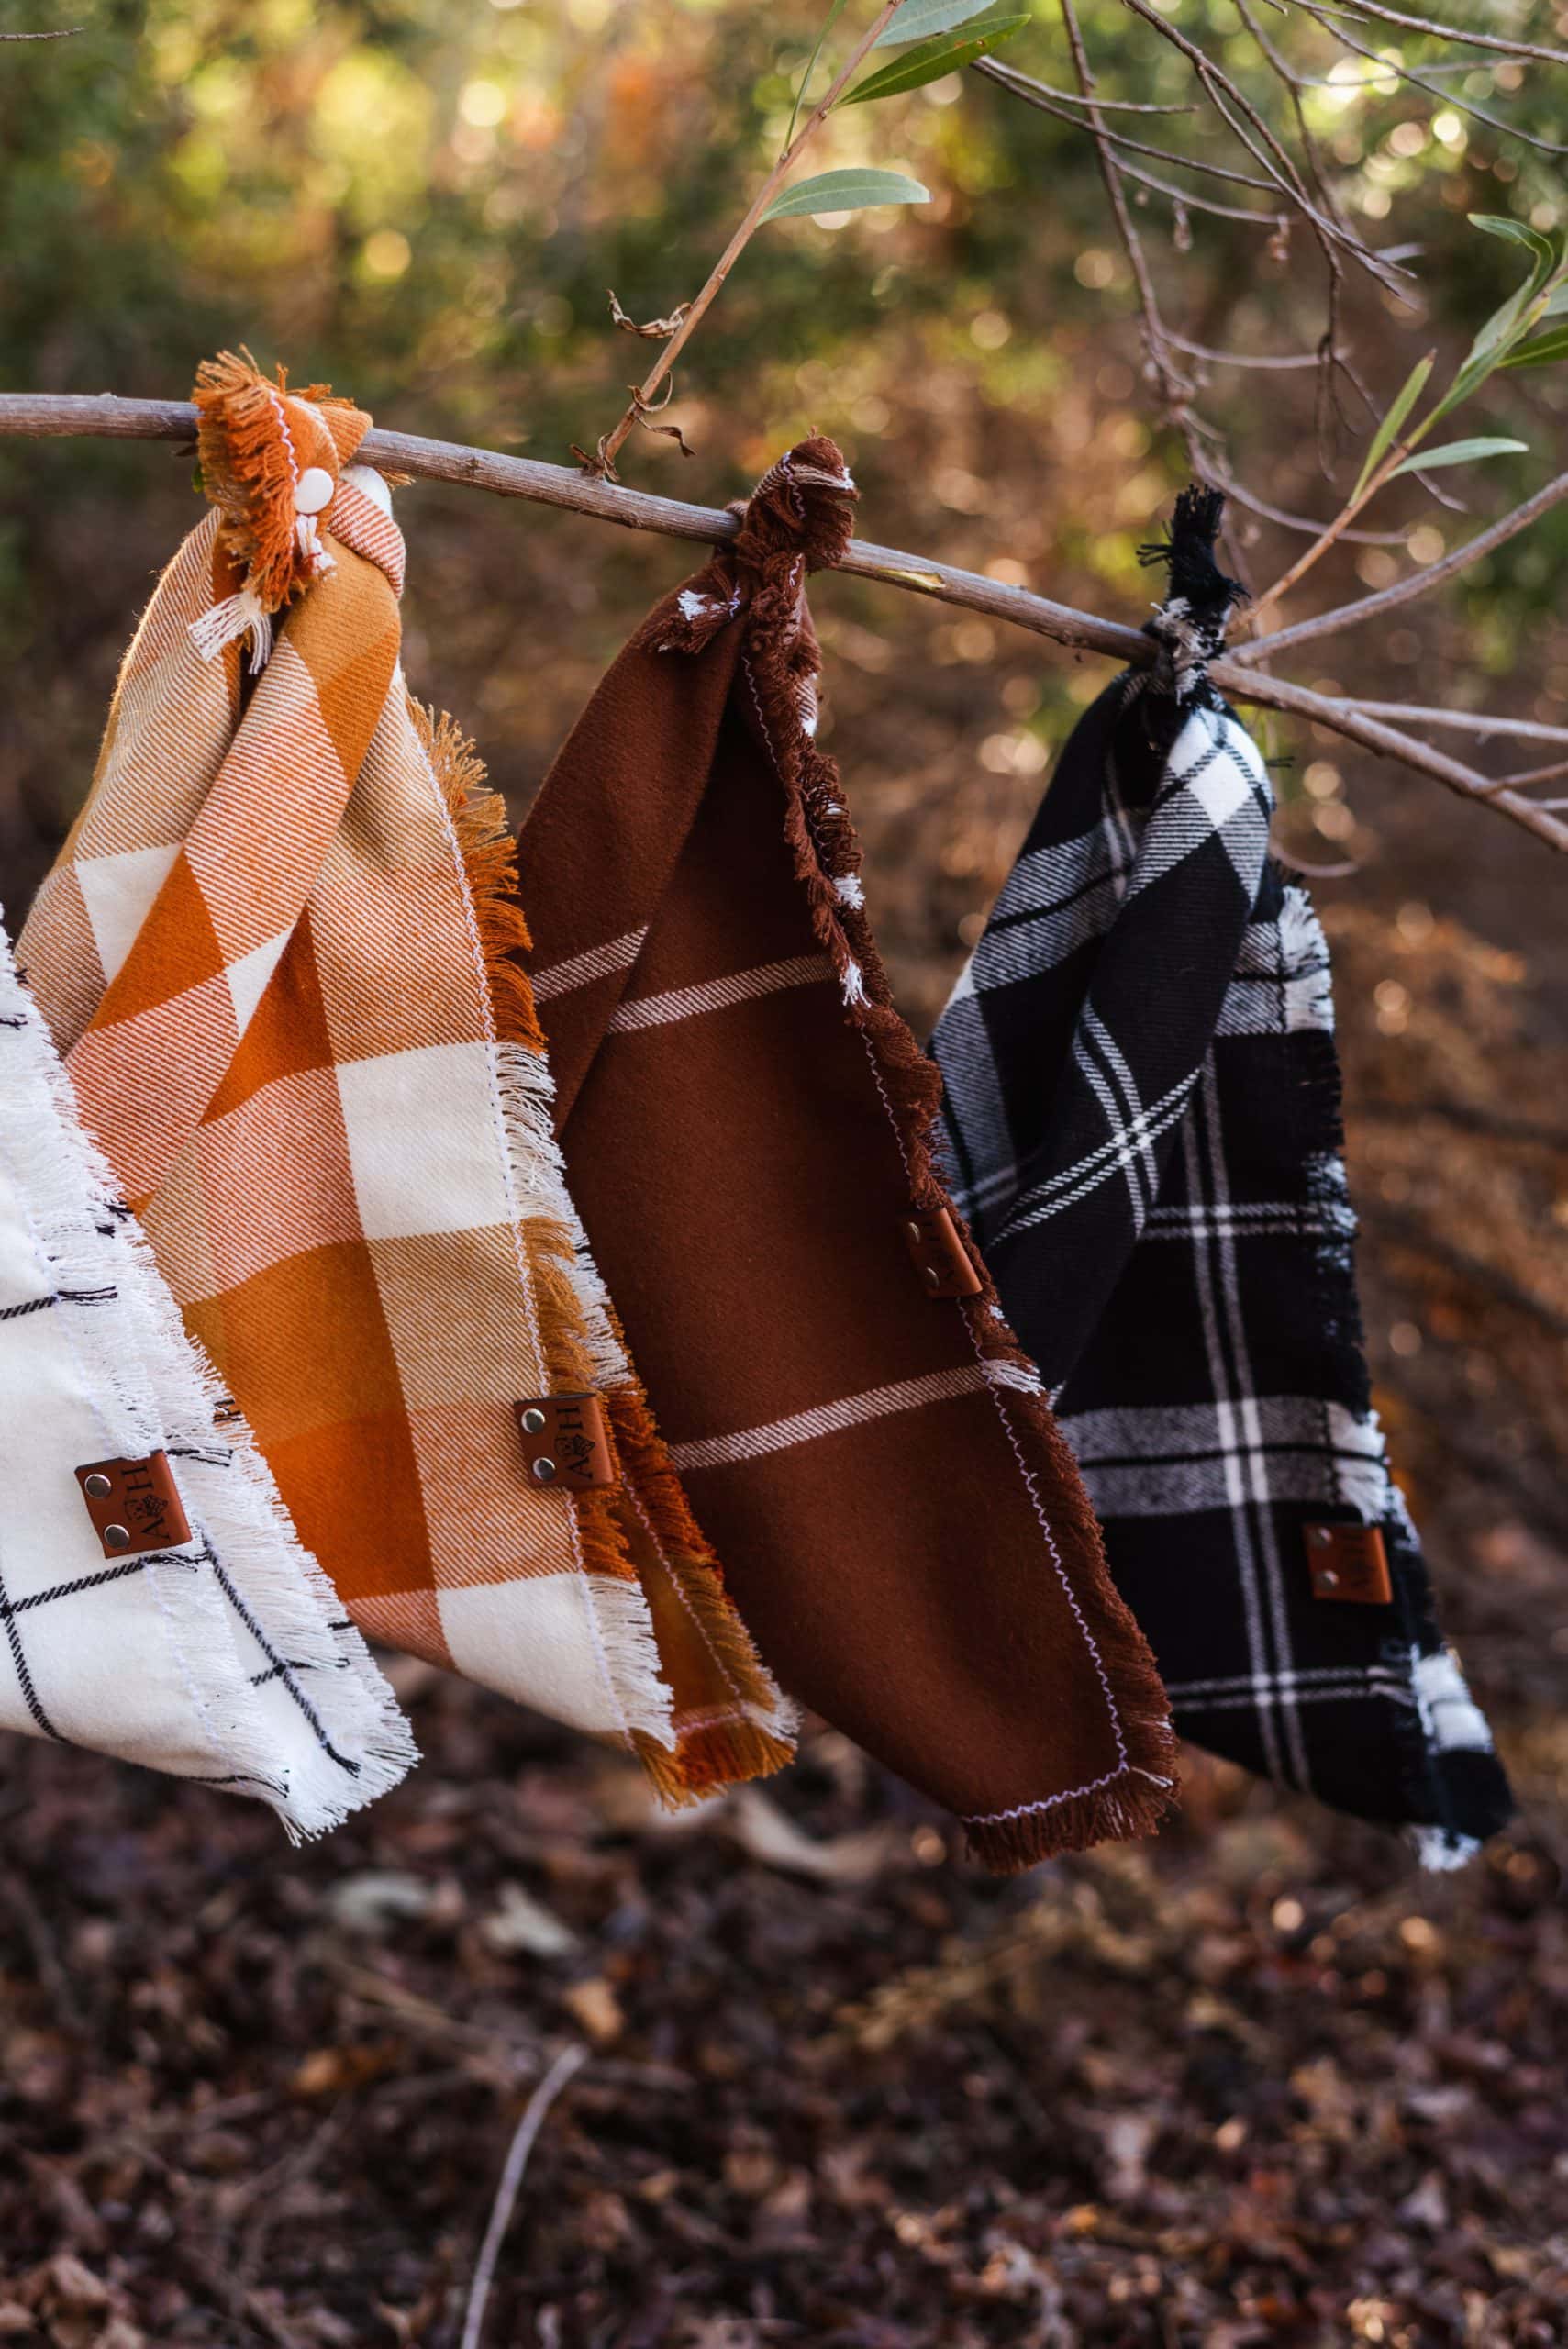 Griffin Frayed Dog Bandana Hanging on a Branch with other Fall Dog Bandanas